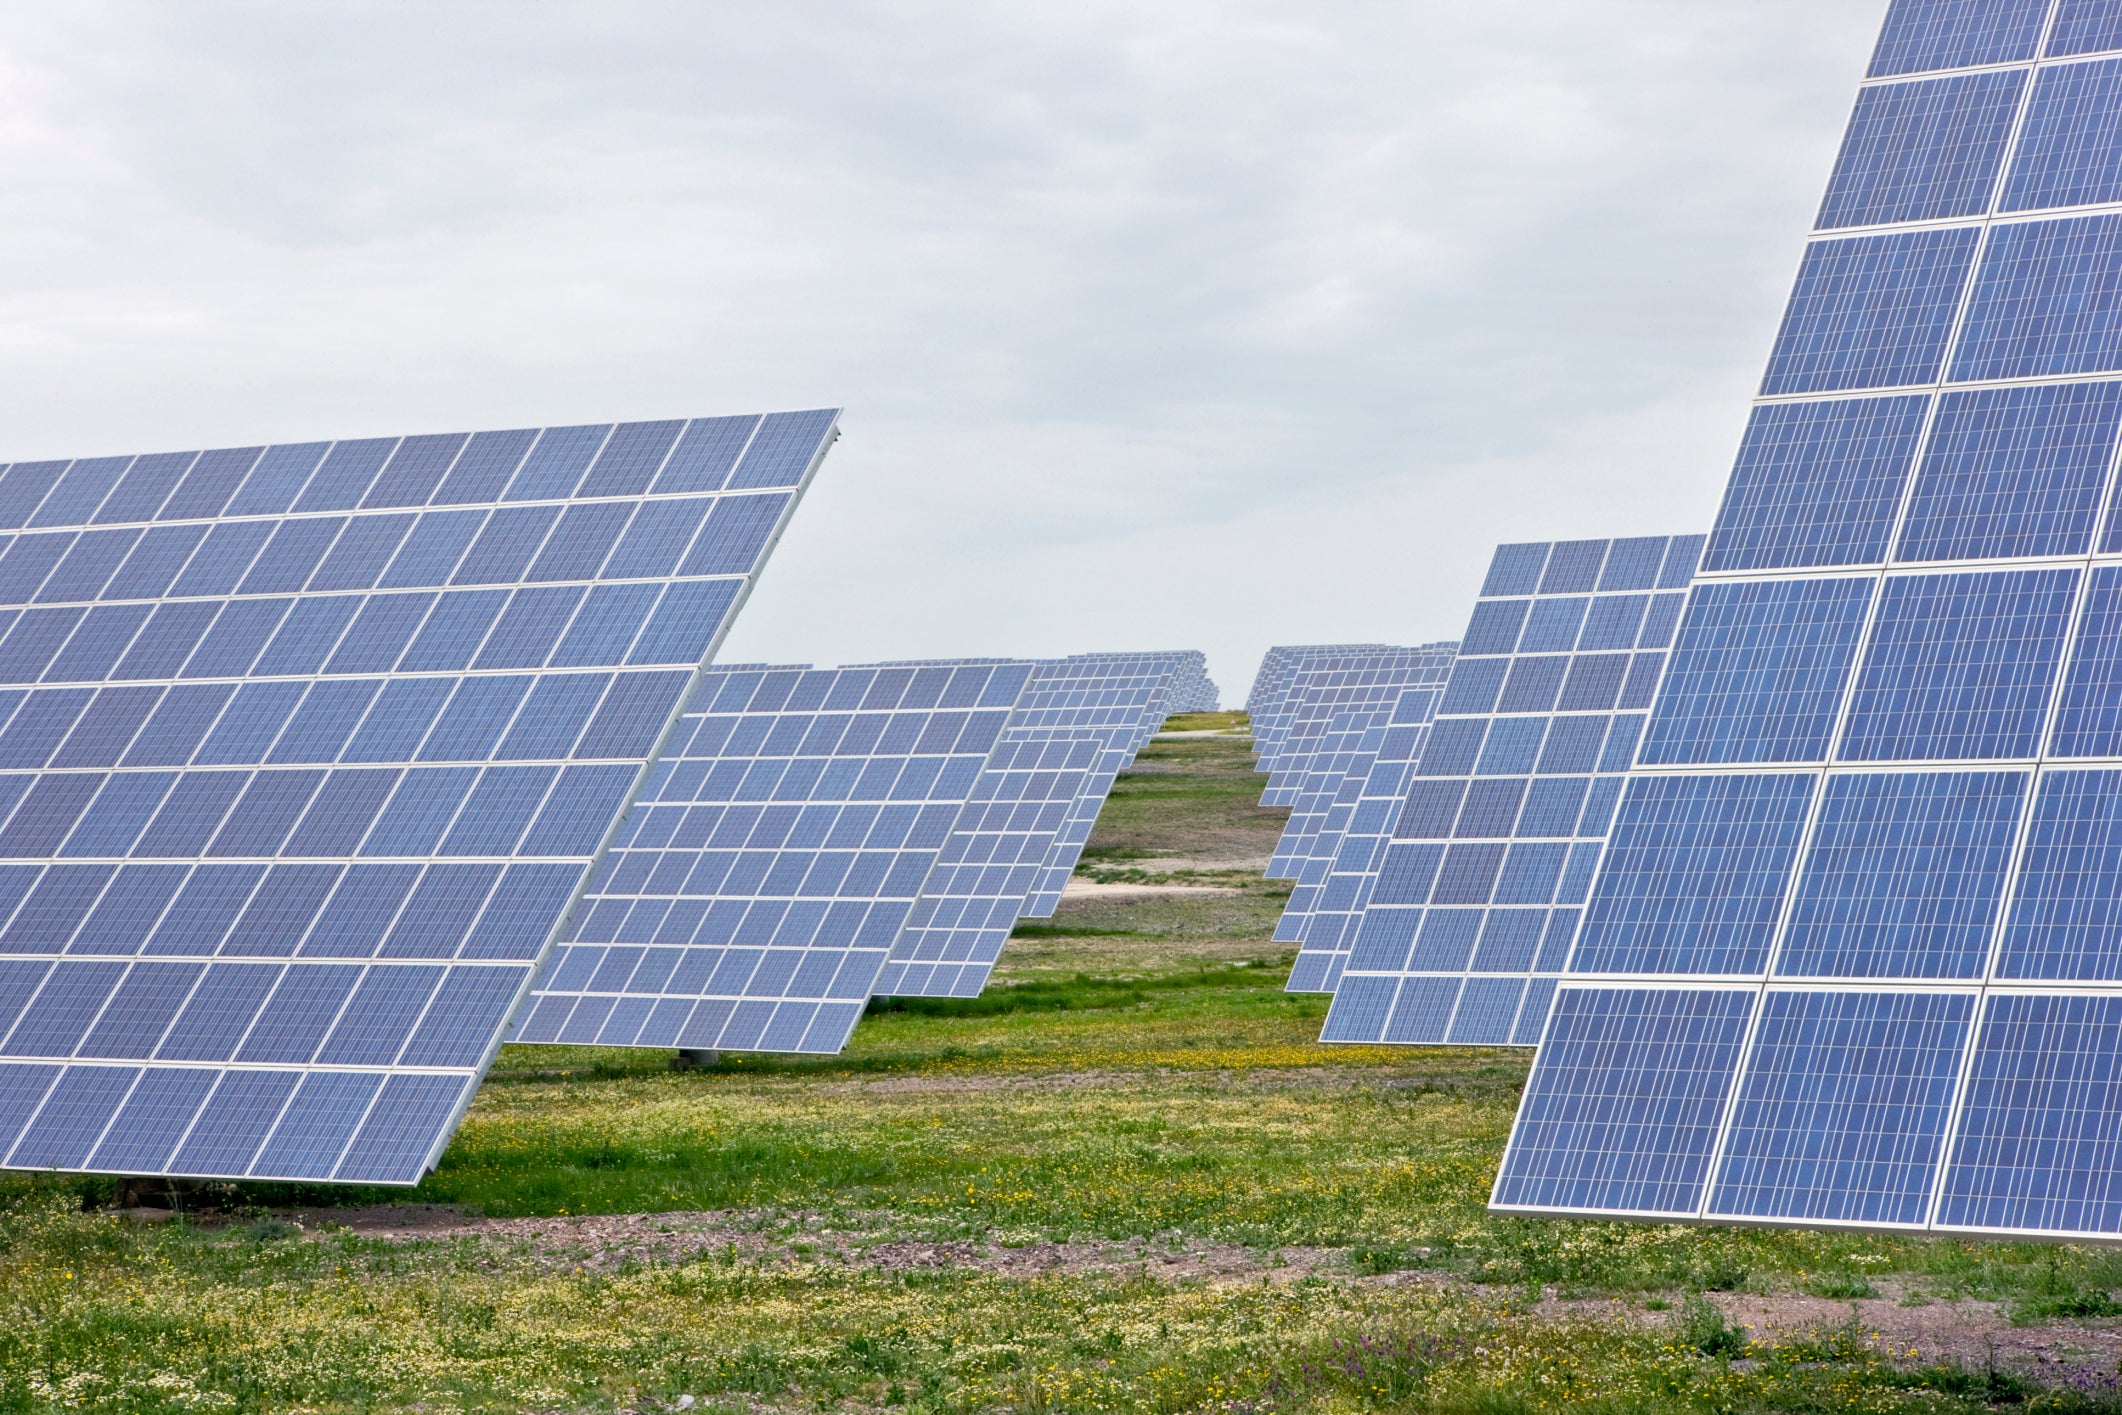 Solar panels are one of the biggest sources of renewable energy in Portugal